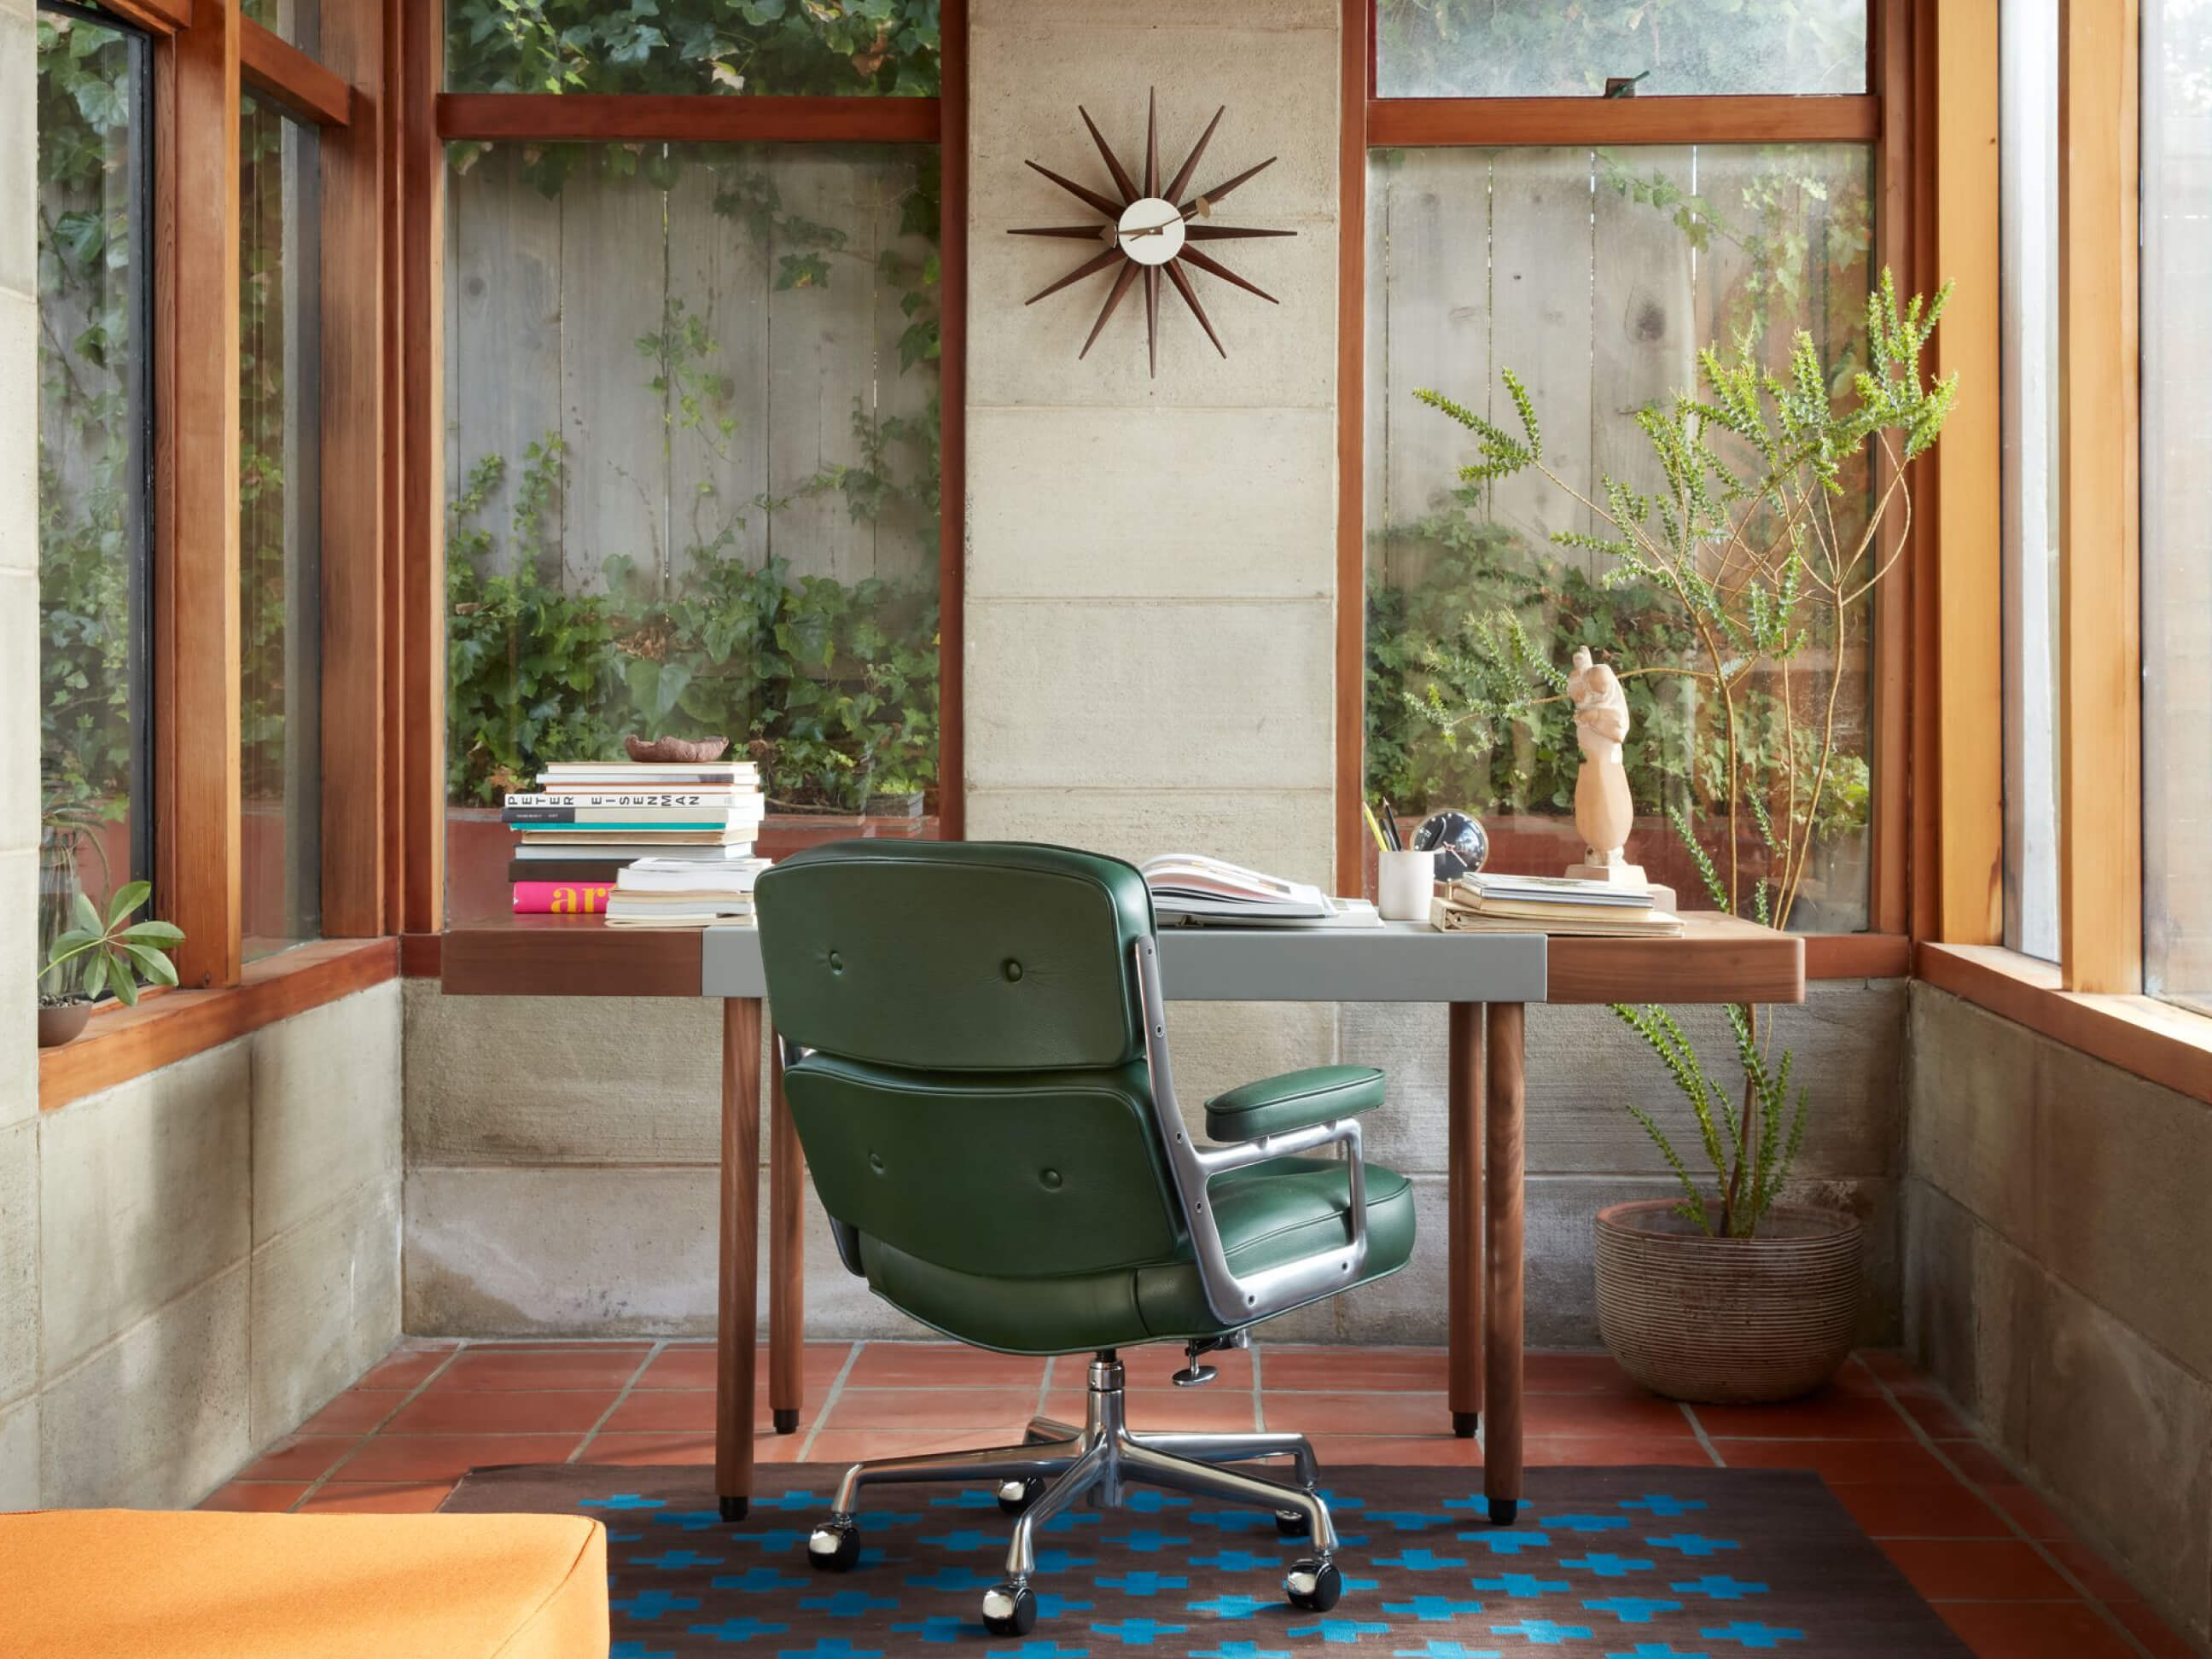 A boardroom classic completes a modern home office: The Eames Executive Lounge Chair is available in our elegant prone leather.